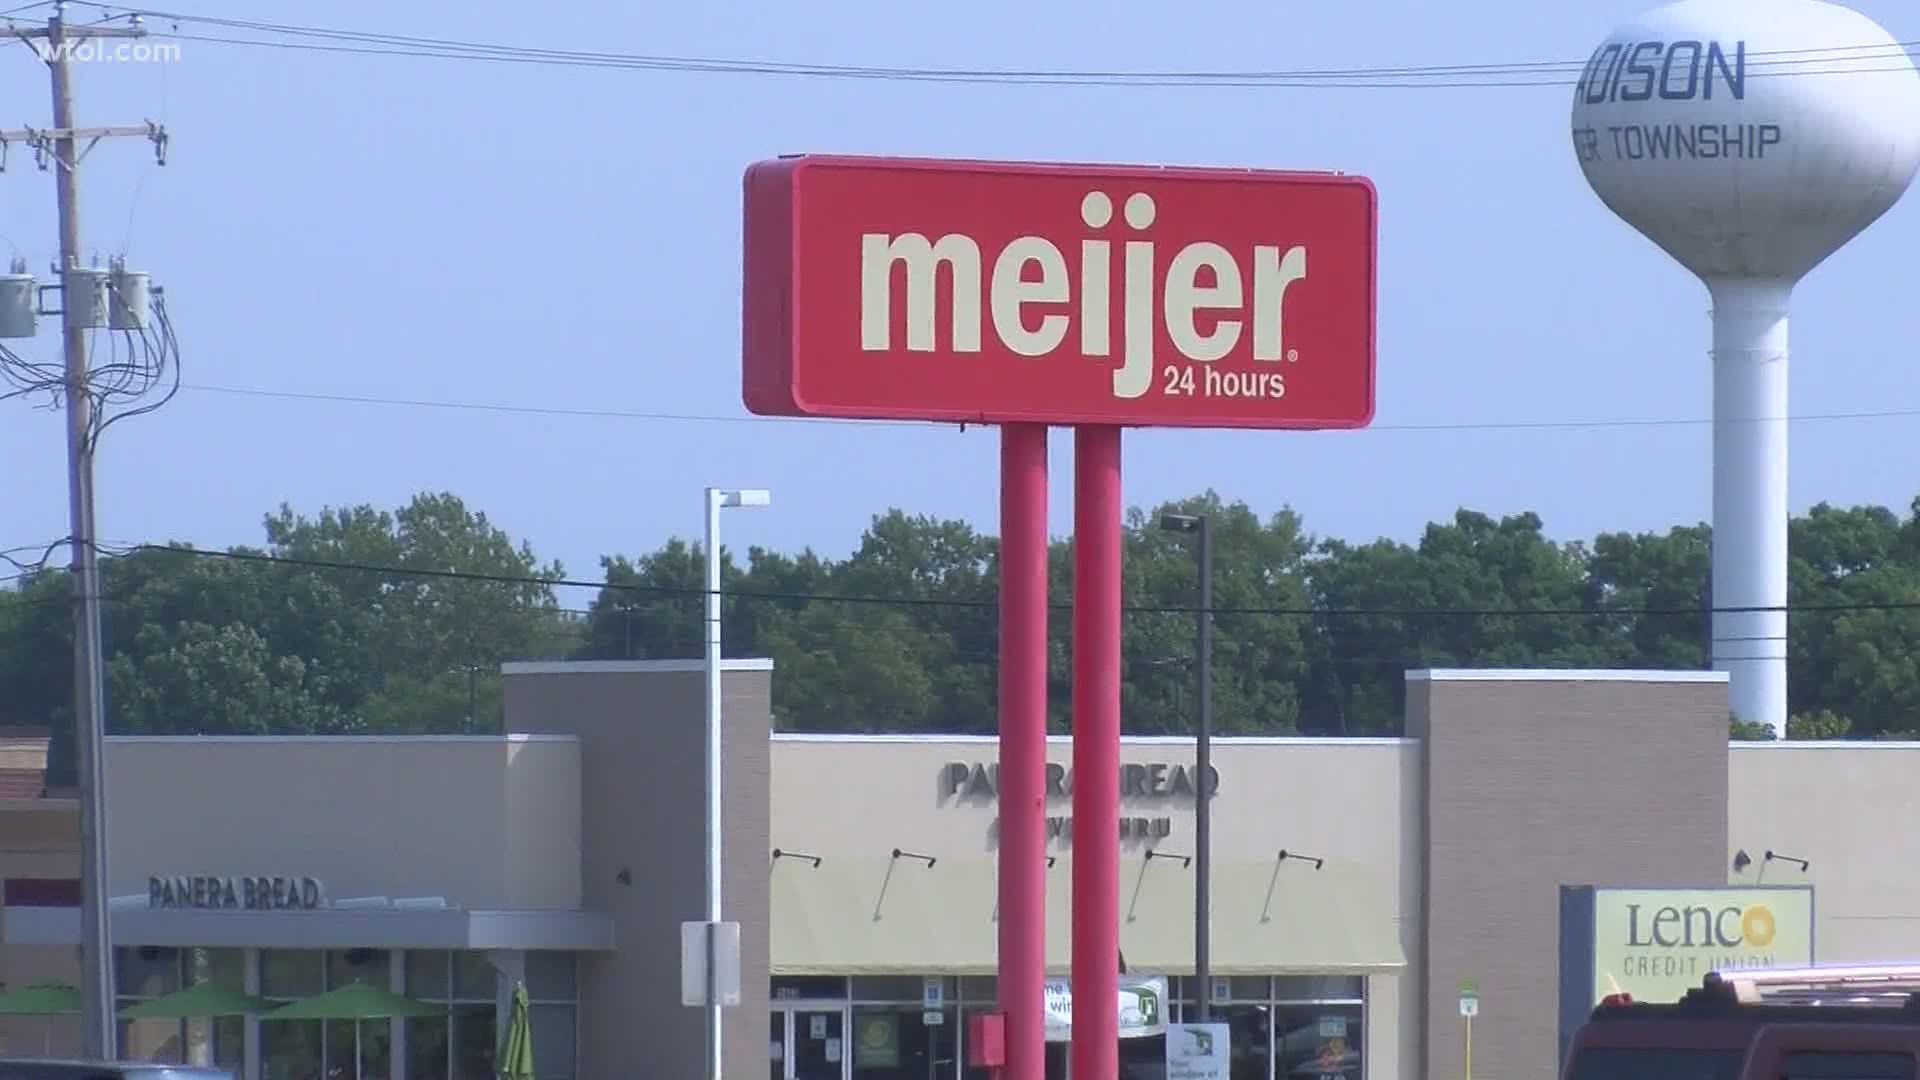 The stabbing happened at a Meijer store in Adrian, Michigan on Sept. 16. A CPL holder held suspect at gunpoint until police arrived. The victim died on scene.